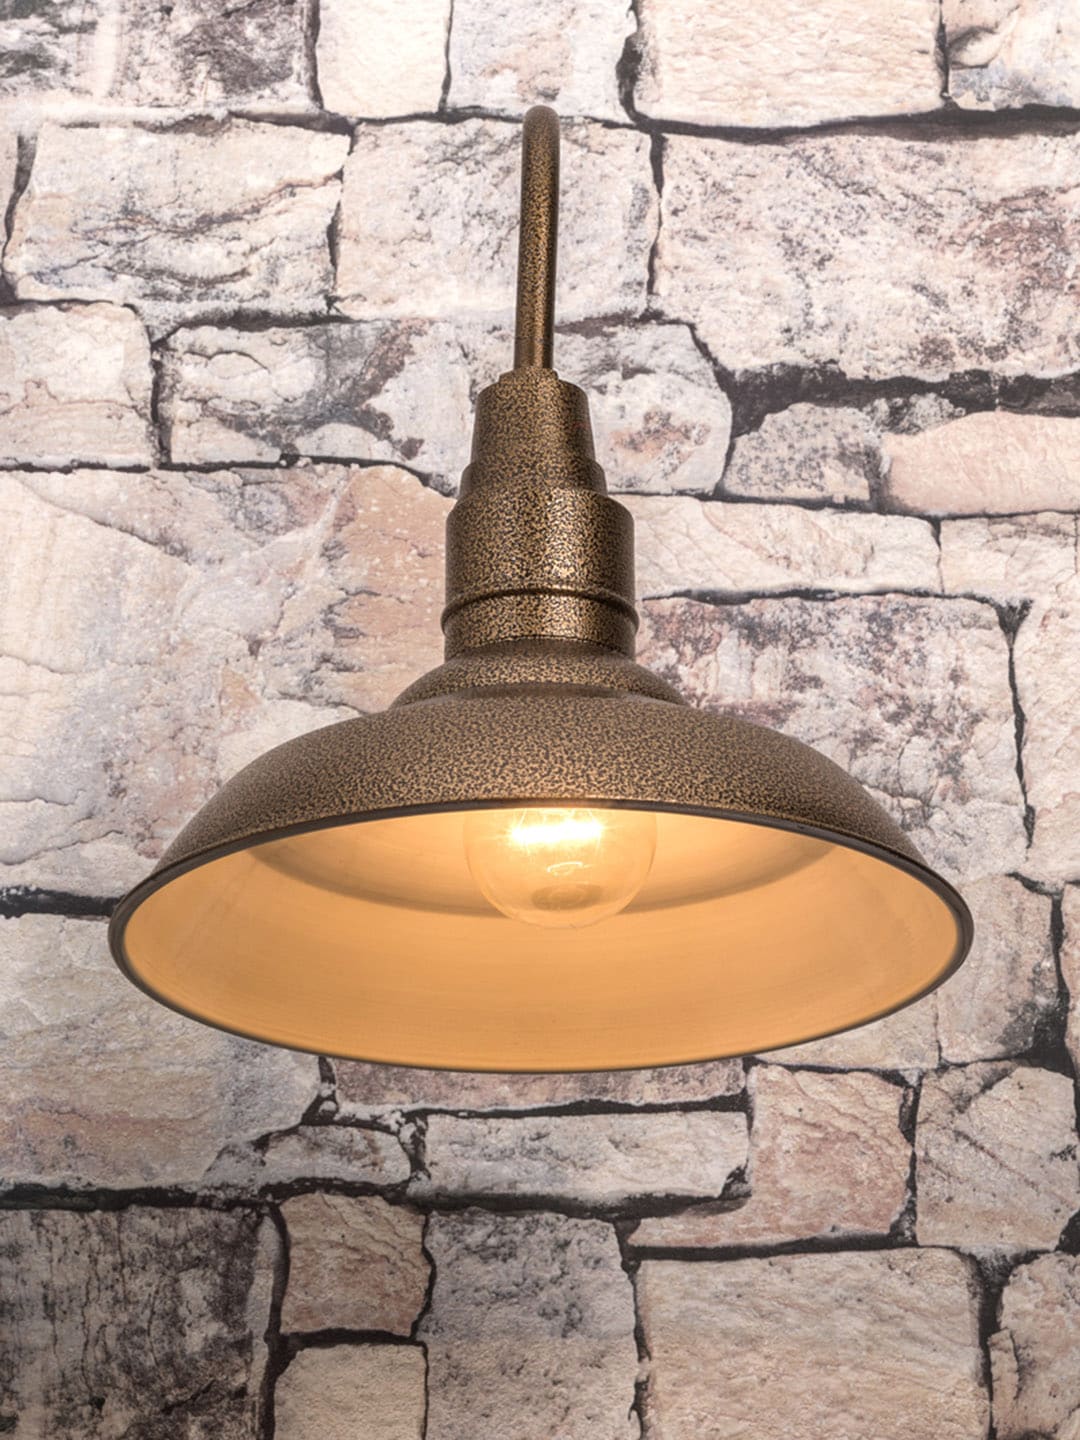 Fos Lighting Gold-Toned Textured Outdoor Barn Light Price in India